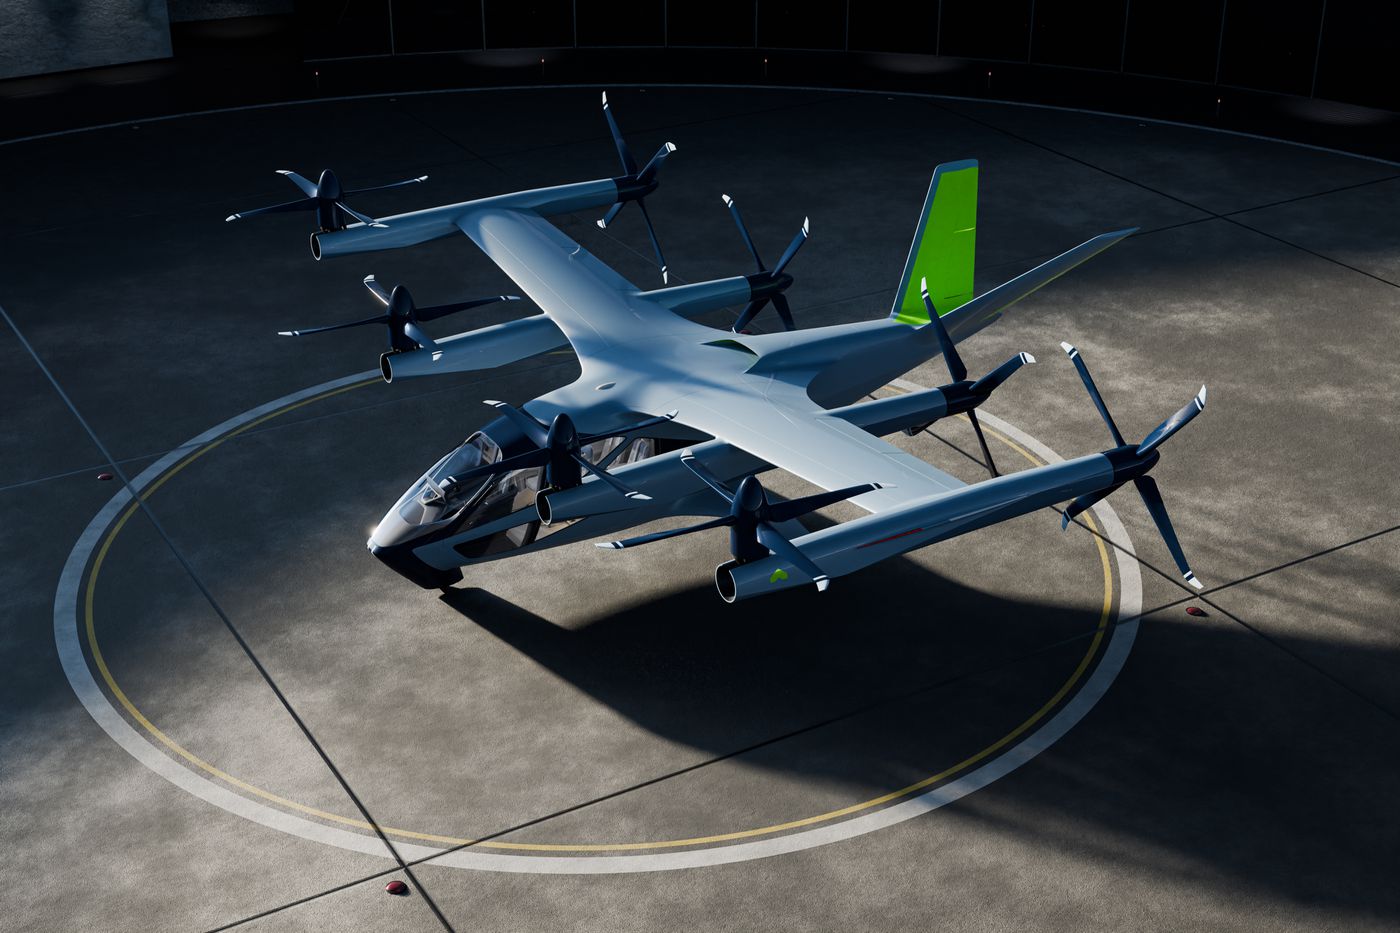 hyundai says its four-passenger evtol will be ready for 2028